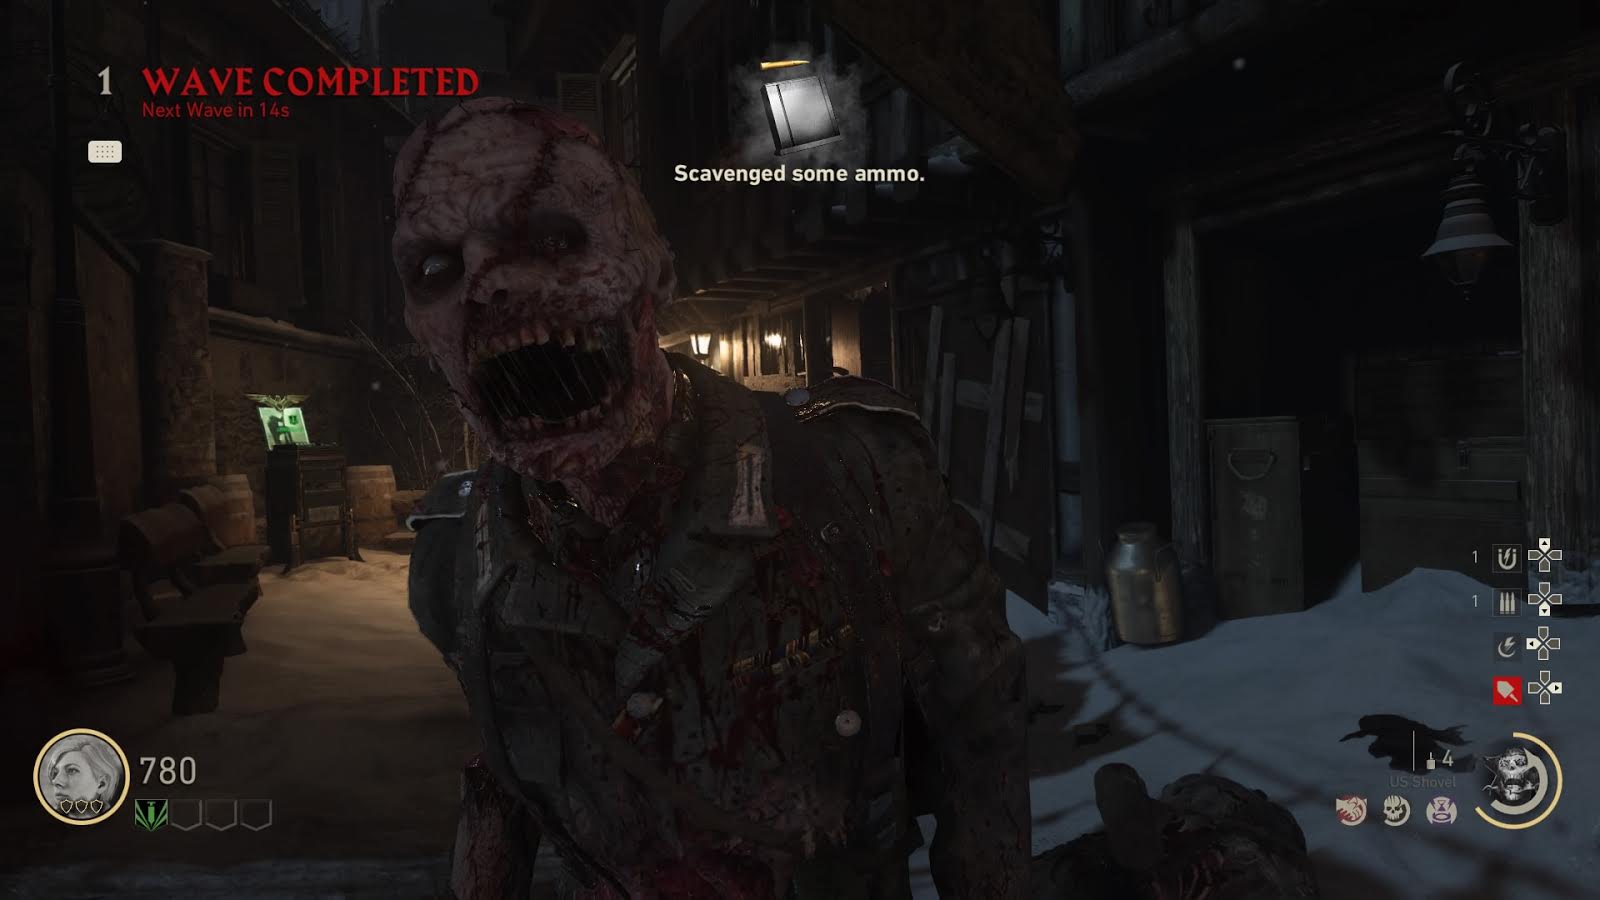 AH A ZOMBIE... and the Zombies mode HUD!